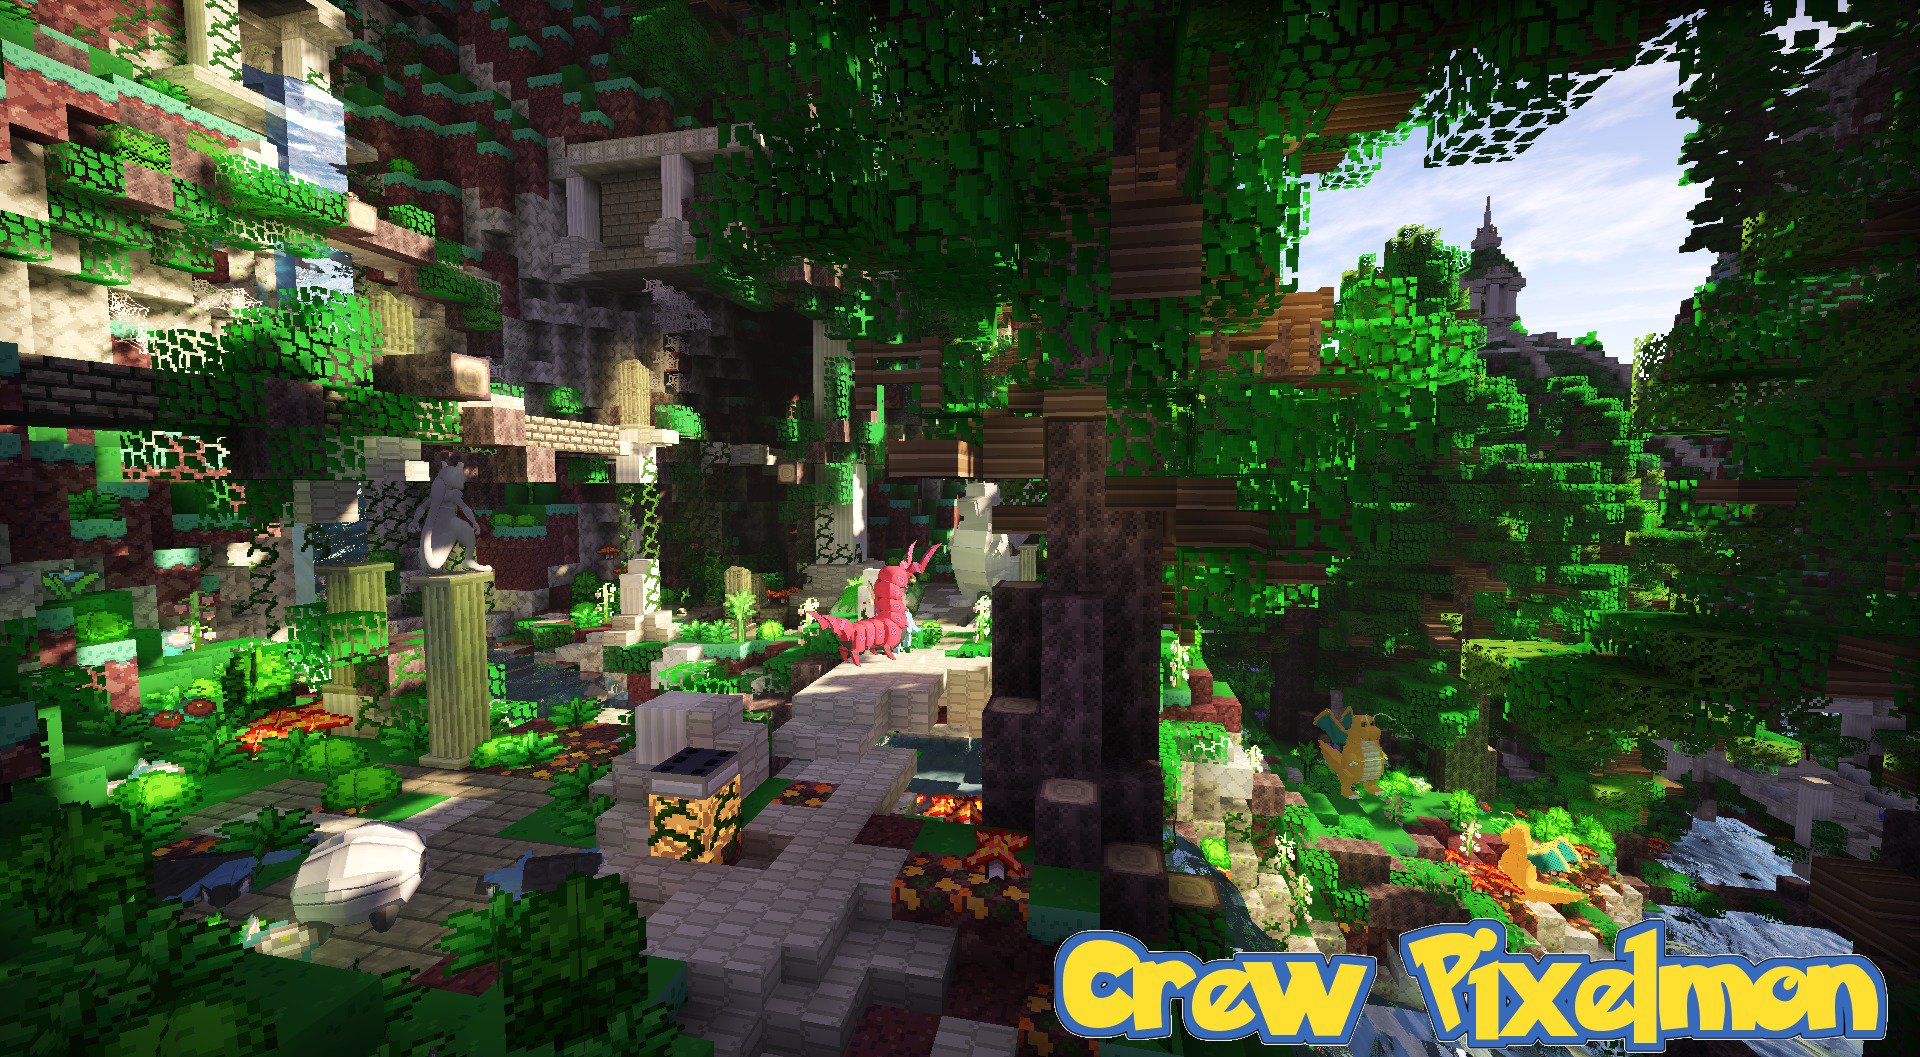 Bz The Crew Pixelmon Map Is Now Available For You To Play Download And Instructions Here T Co Lfmgoqzepw